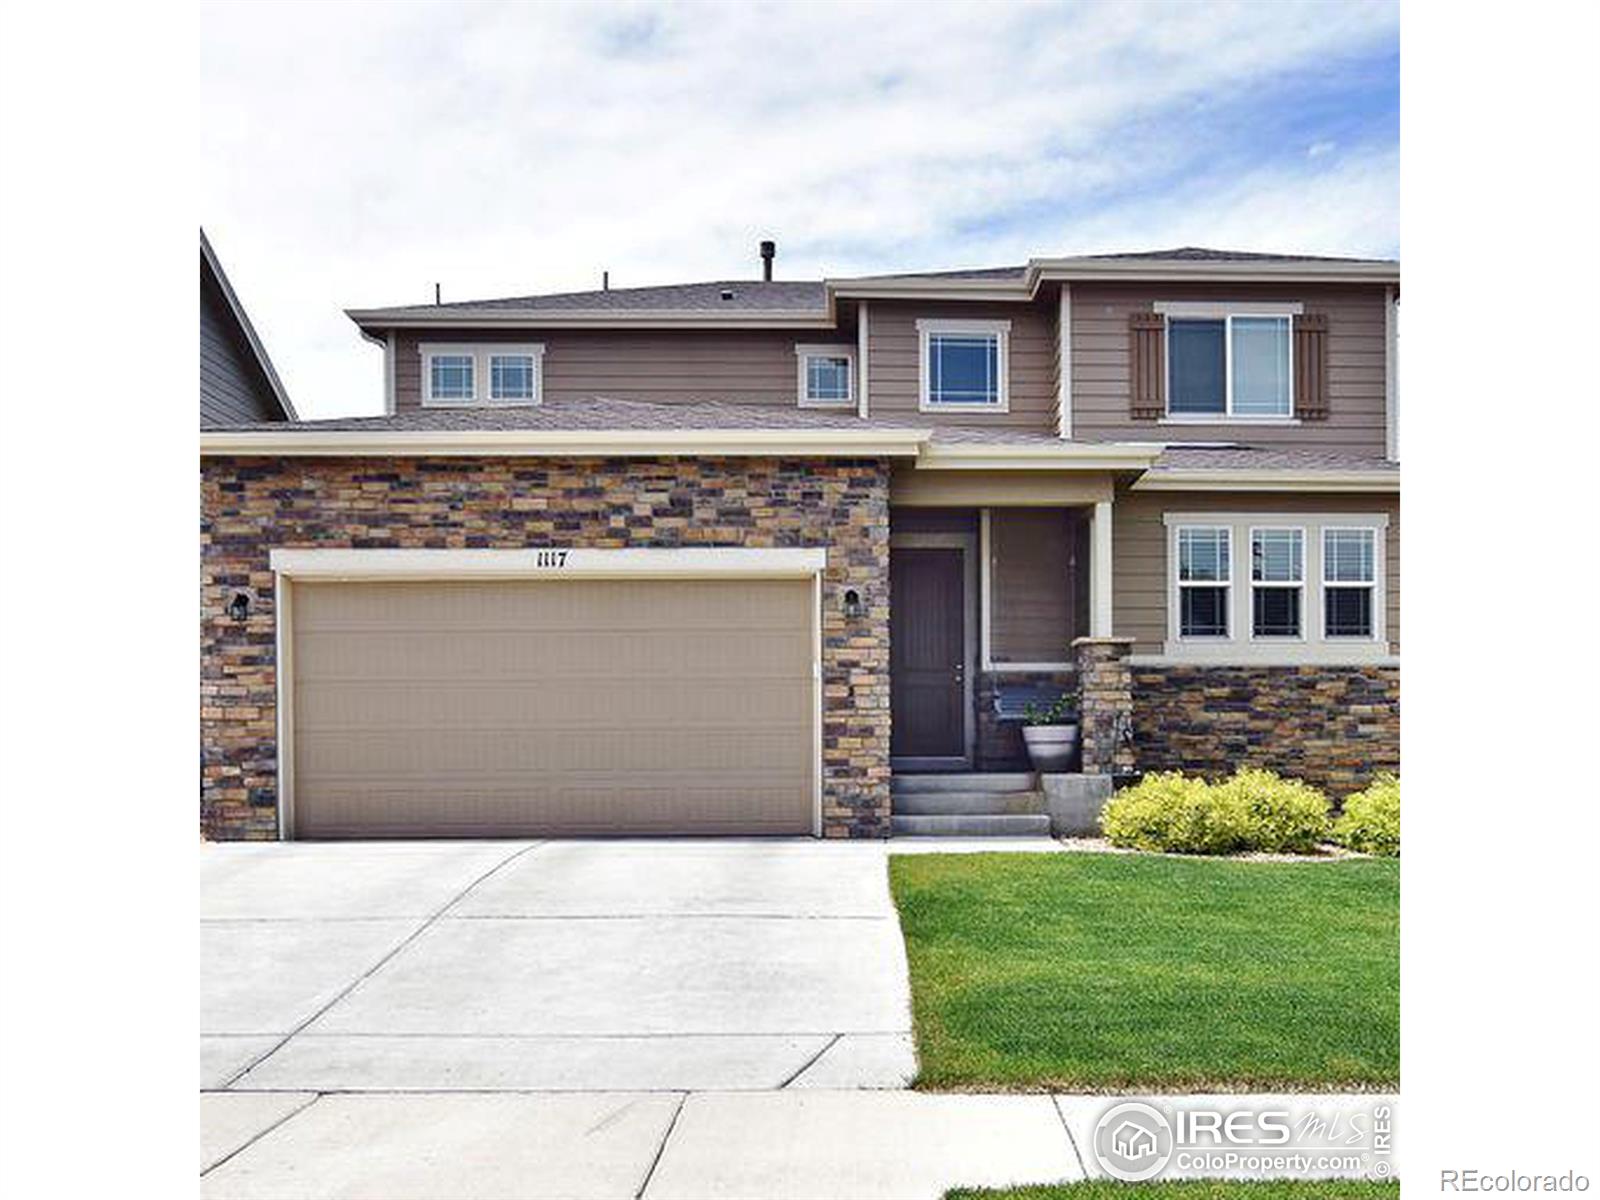 1117  104th Avenue, greeley MLS: 456789989828 Beds: 5 Baths: 4 Price: $527,000